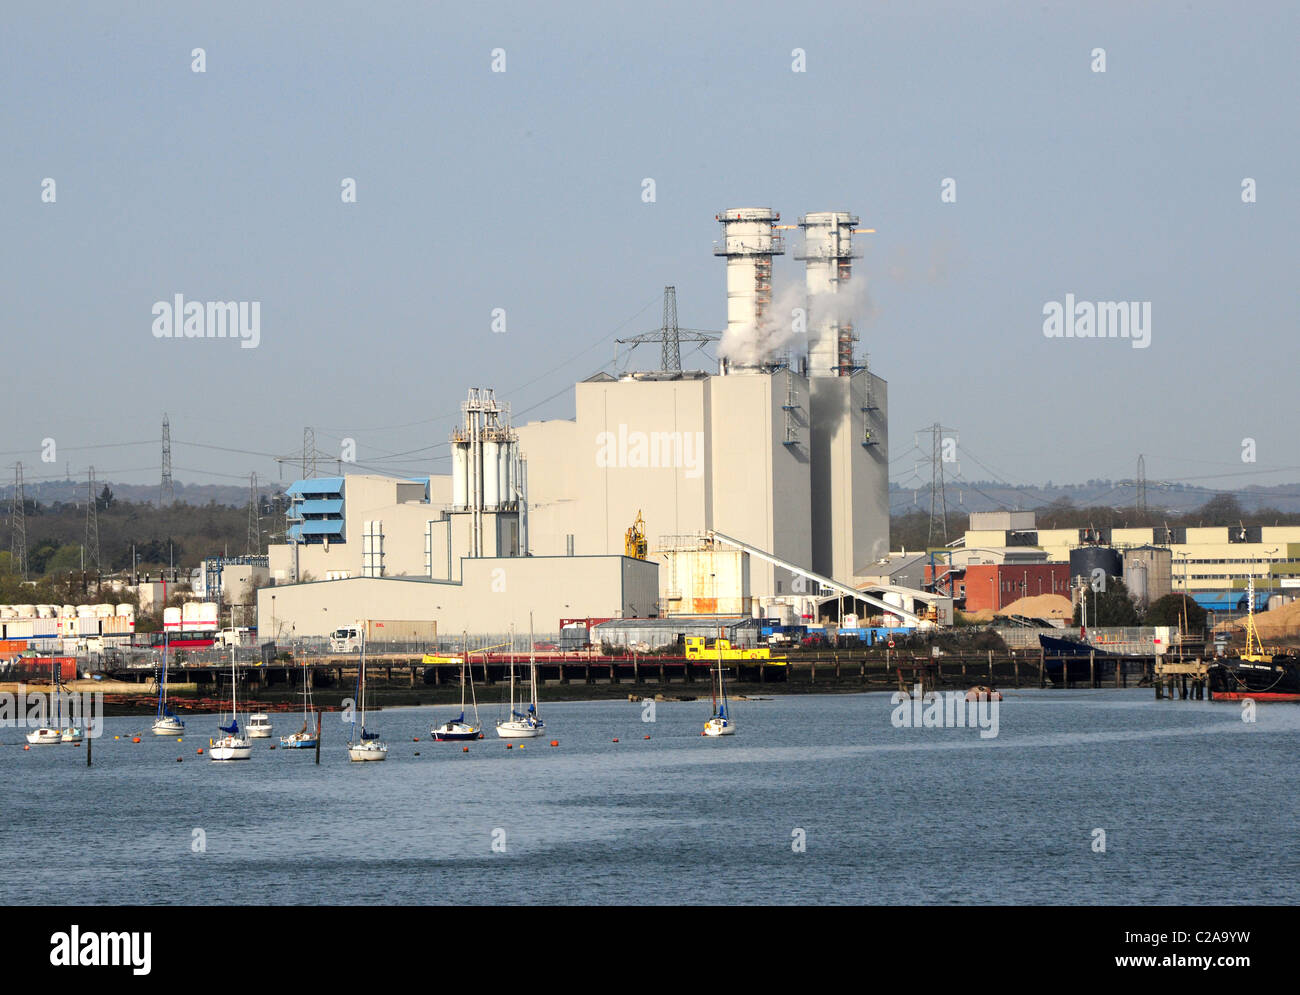 A modern natural gas fired power station by the waterfront, with boats. Stock Photo